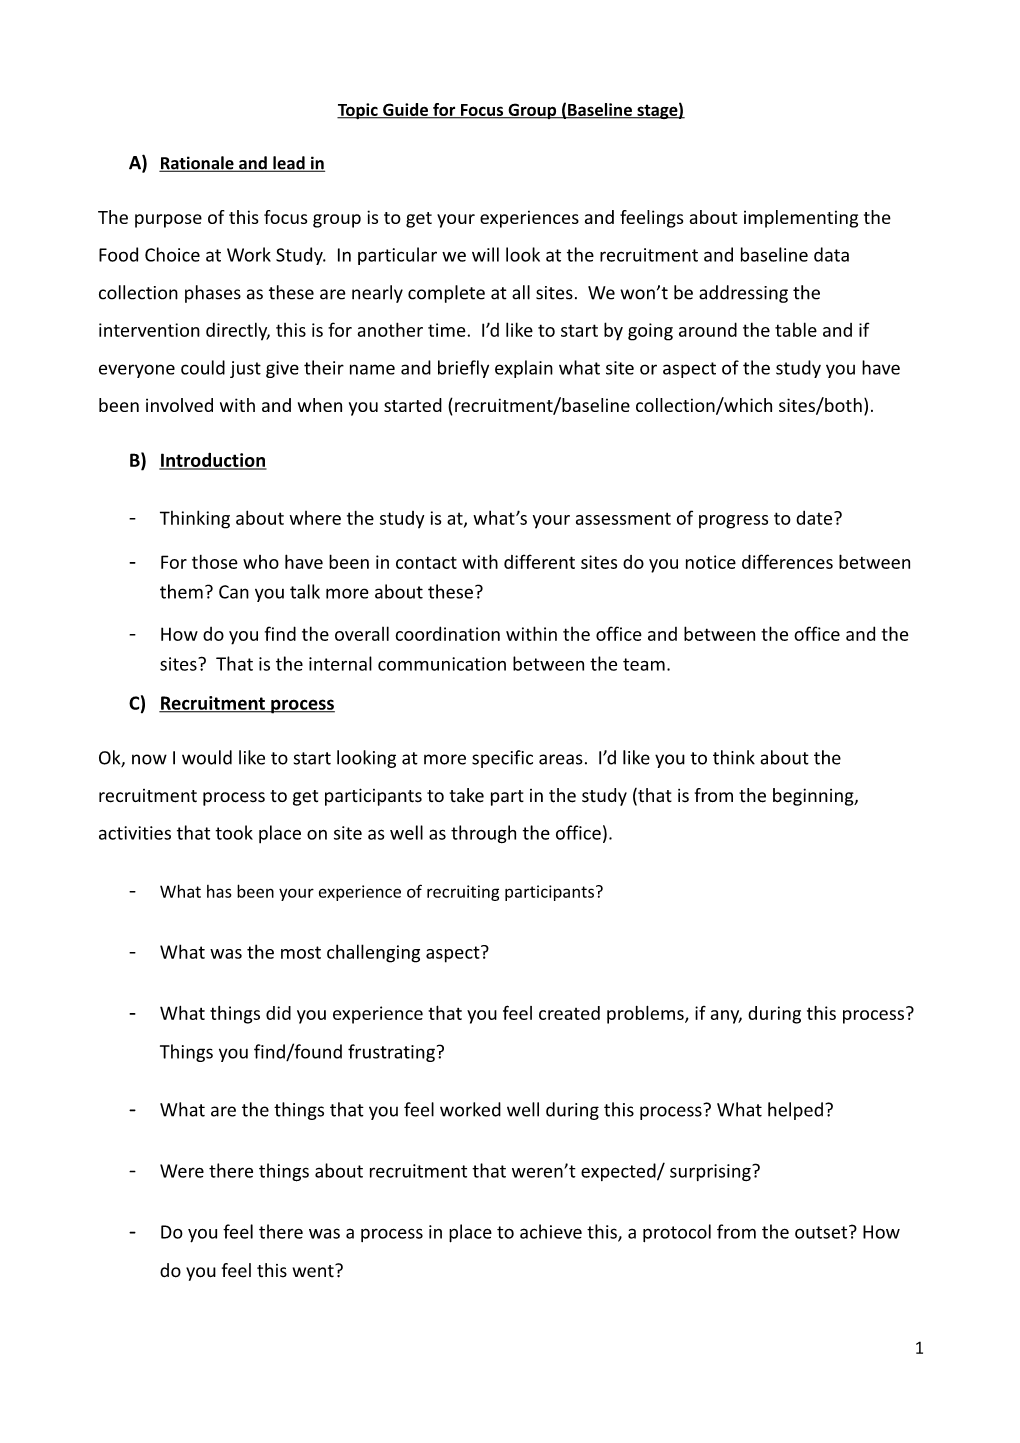 Topic Guide for Focus Group (Baseline Stage)